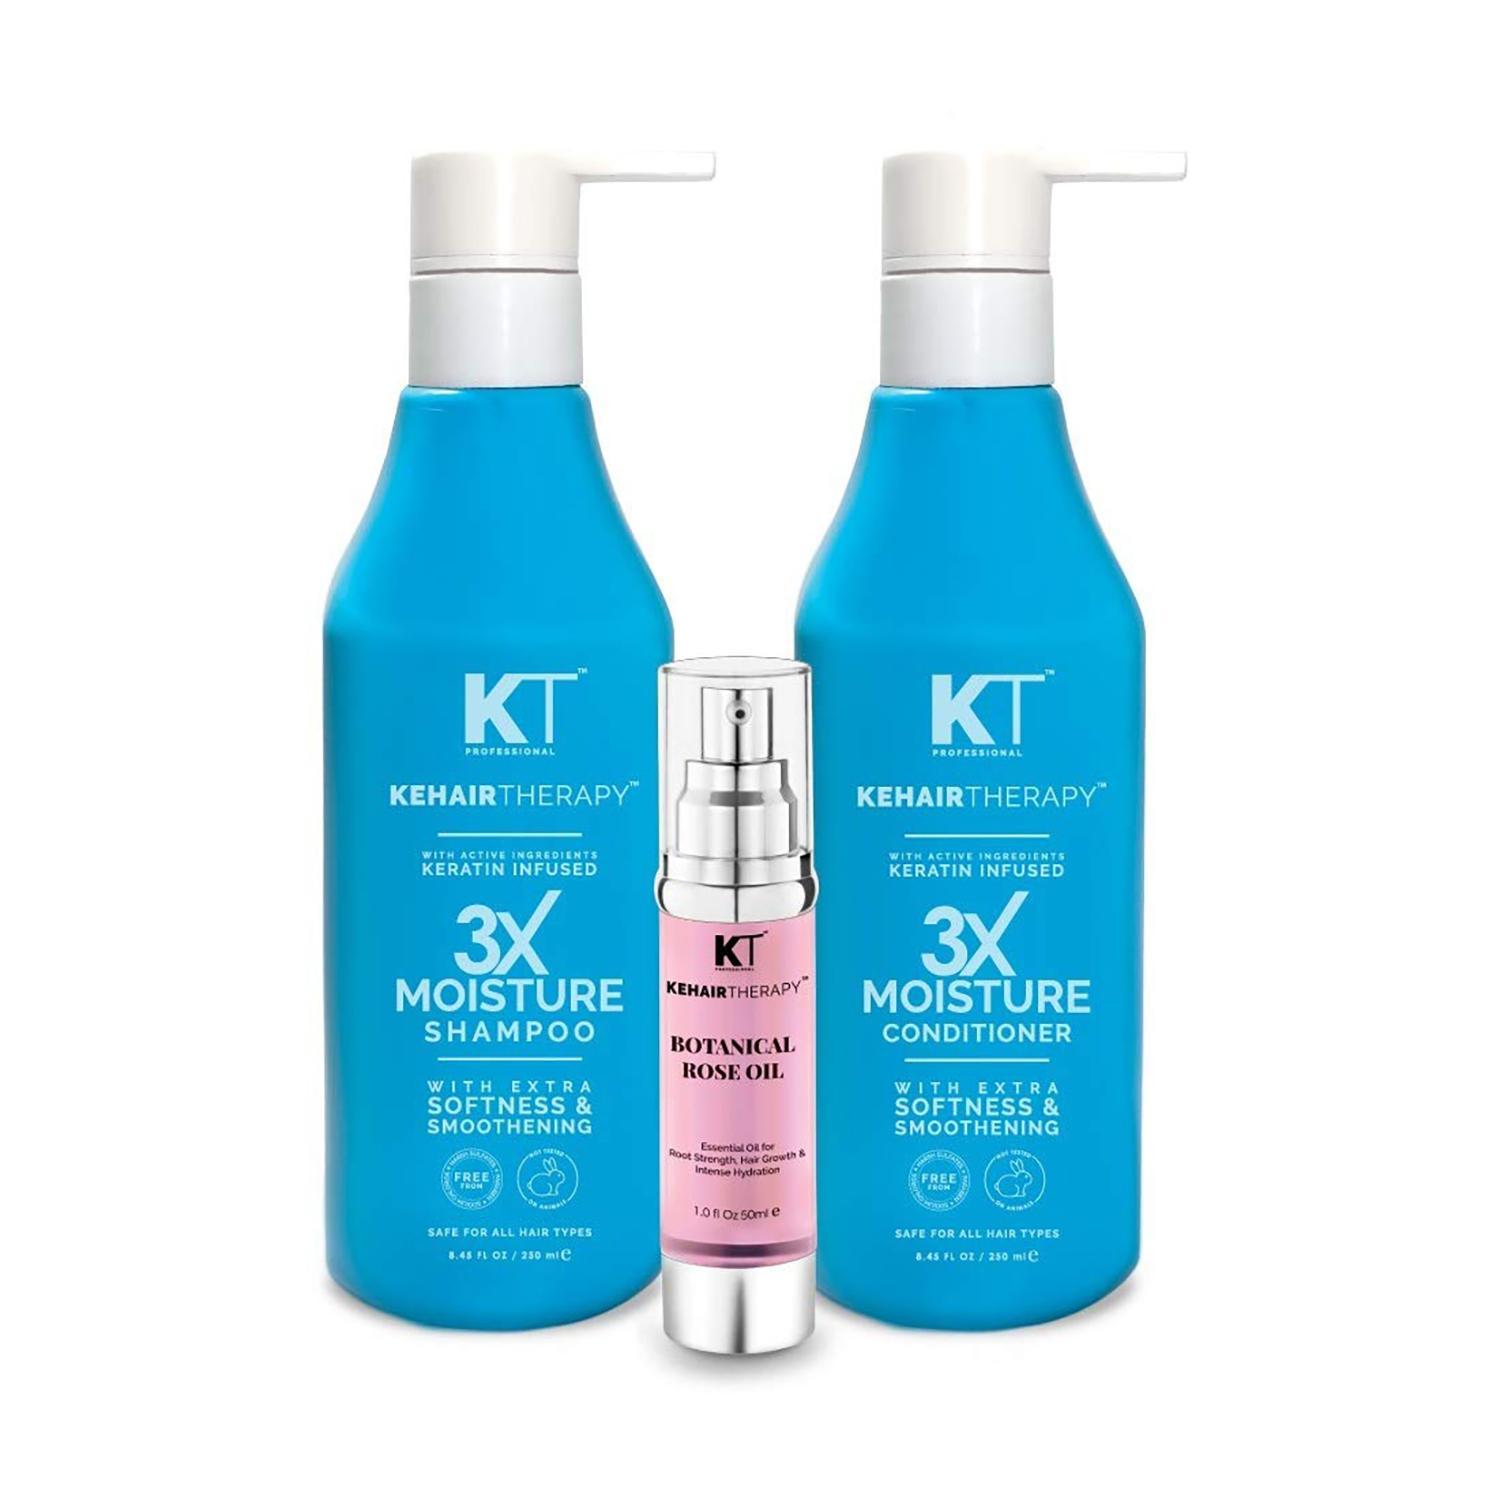 kt professional 3x shampoo & conditioner + botanical rose oil serum (pack of 3) (550ml) combo